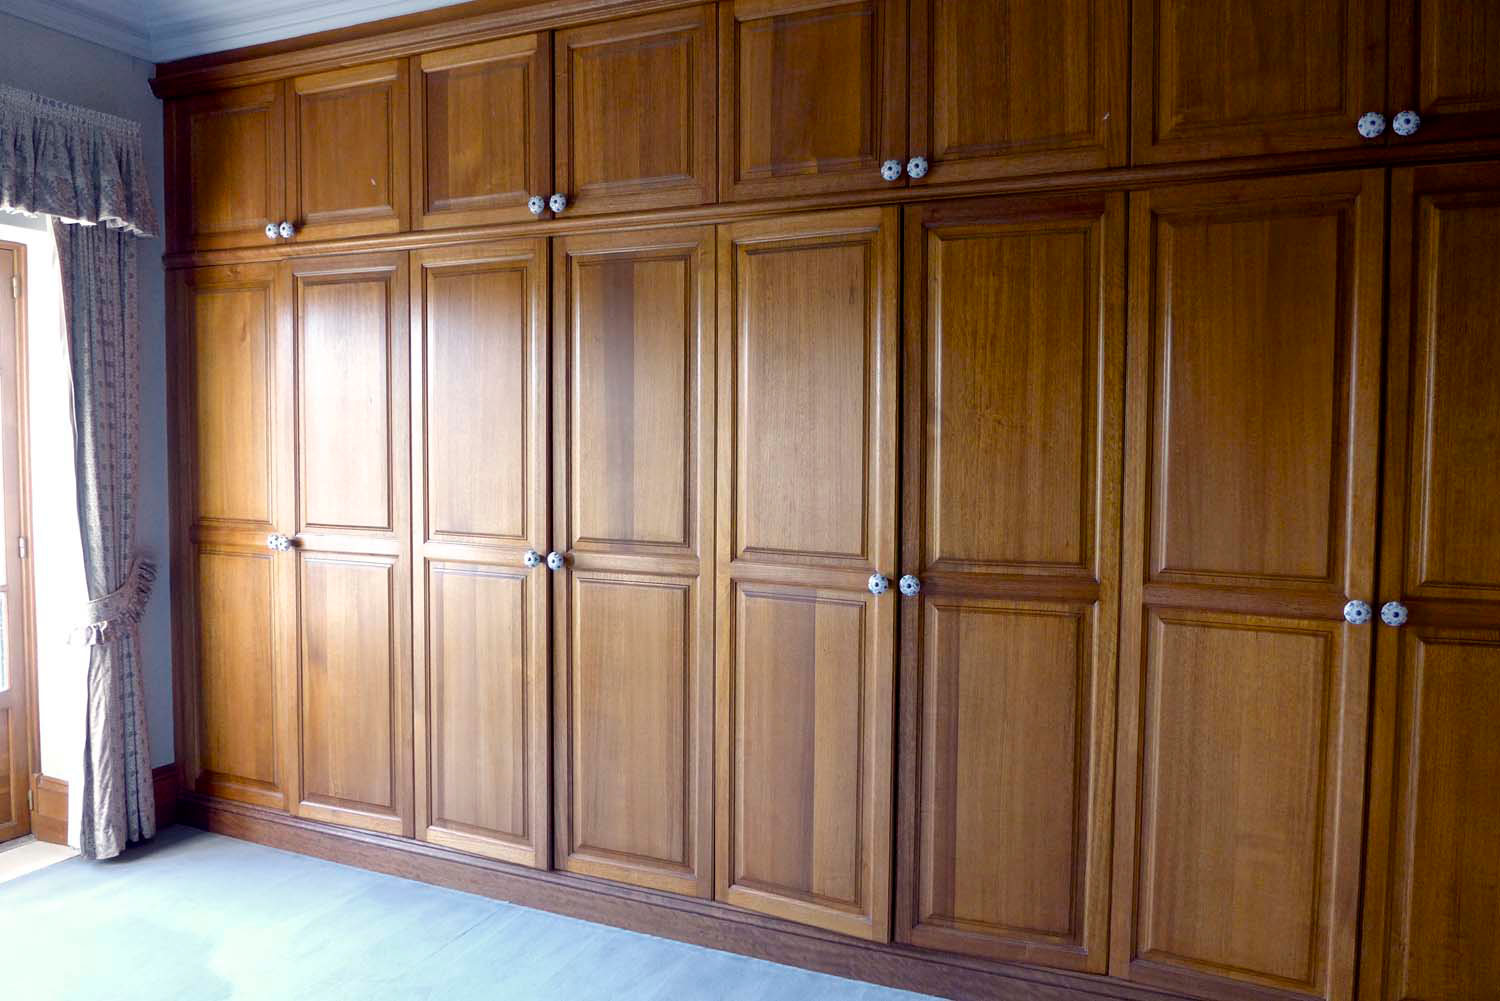 5 Timber wardrobe custom designed with panelled doors and curtains